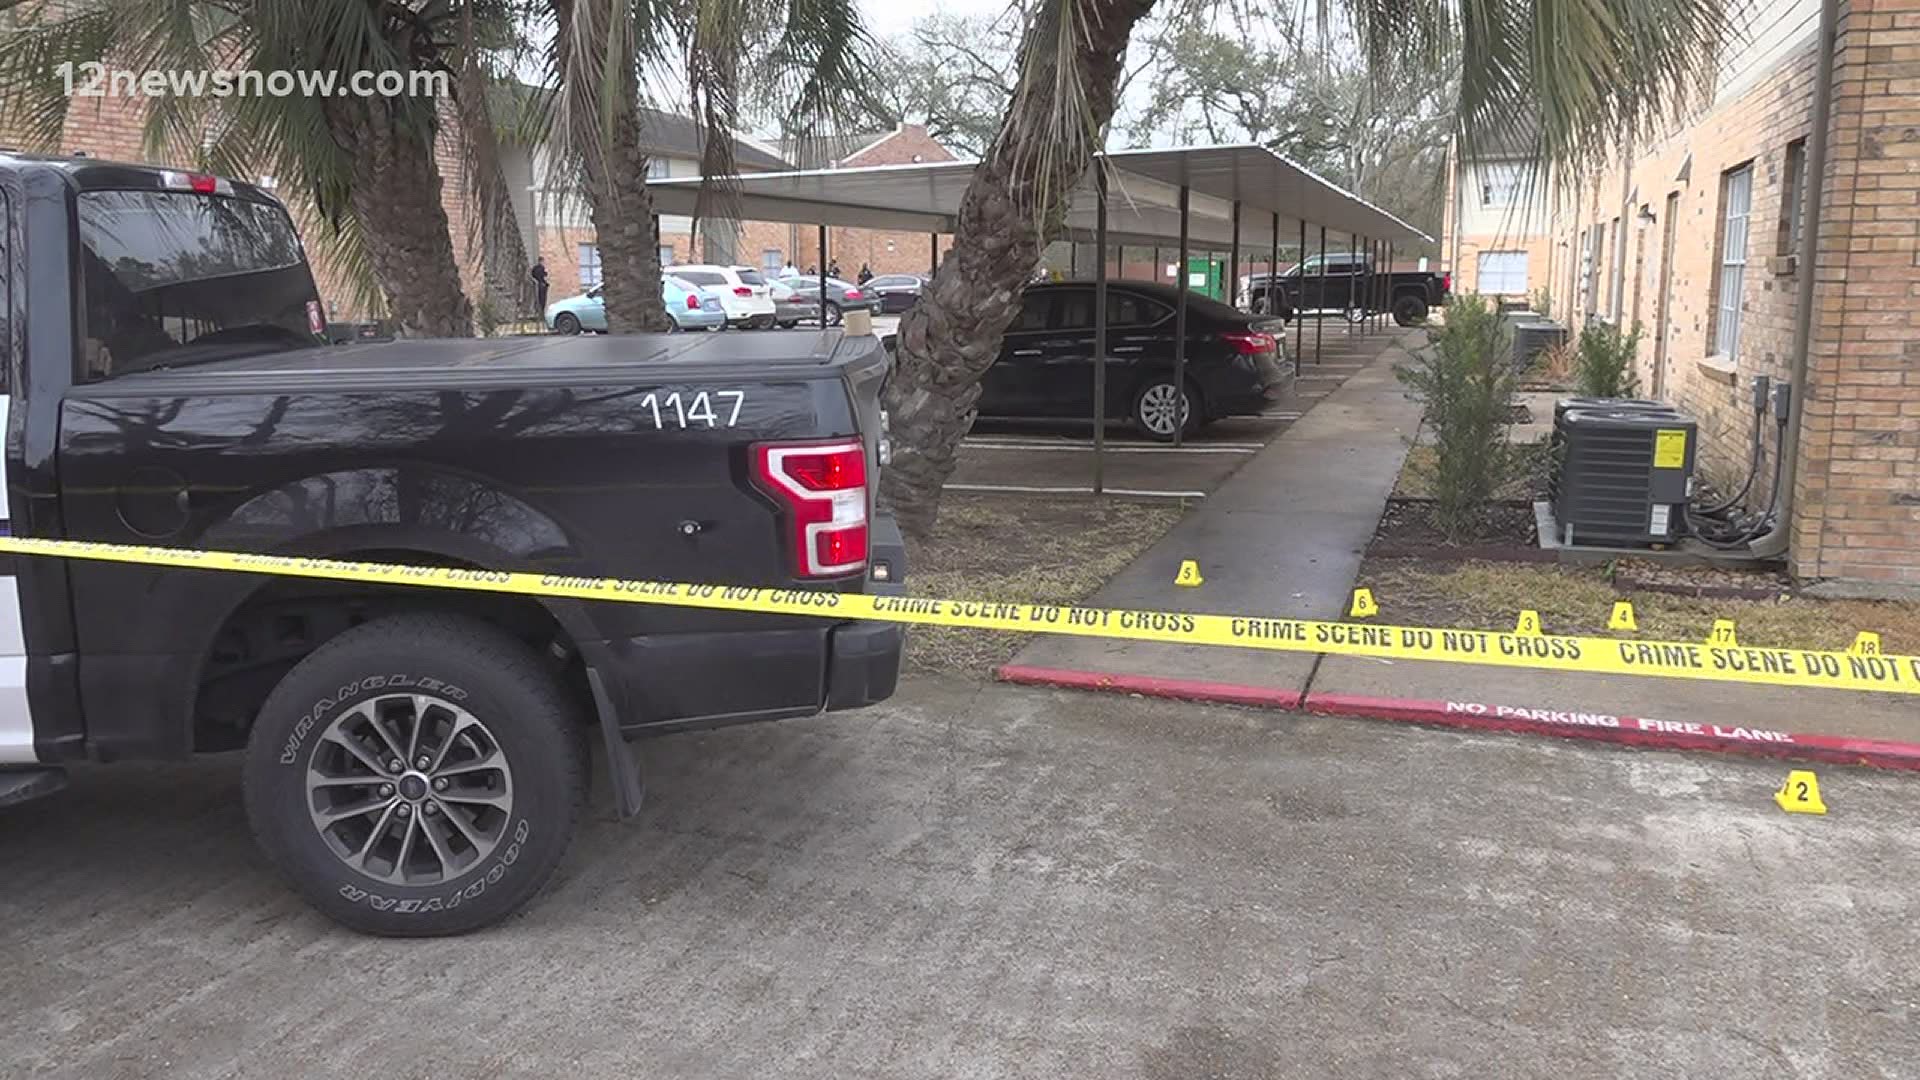 A 20-year-old was shot, but their injuries are not life-threatening, Beaumont Police said. Detectives are checking to see if any security cameras caught video.